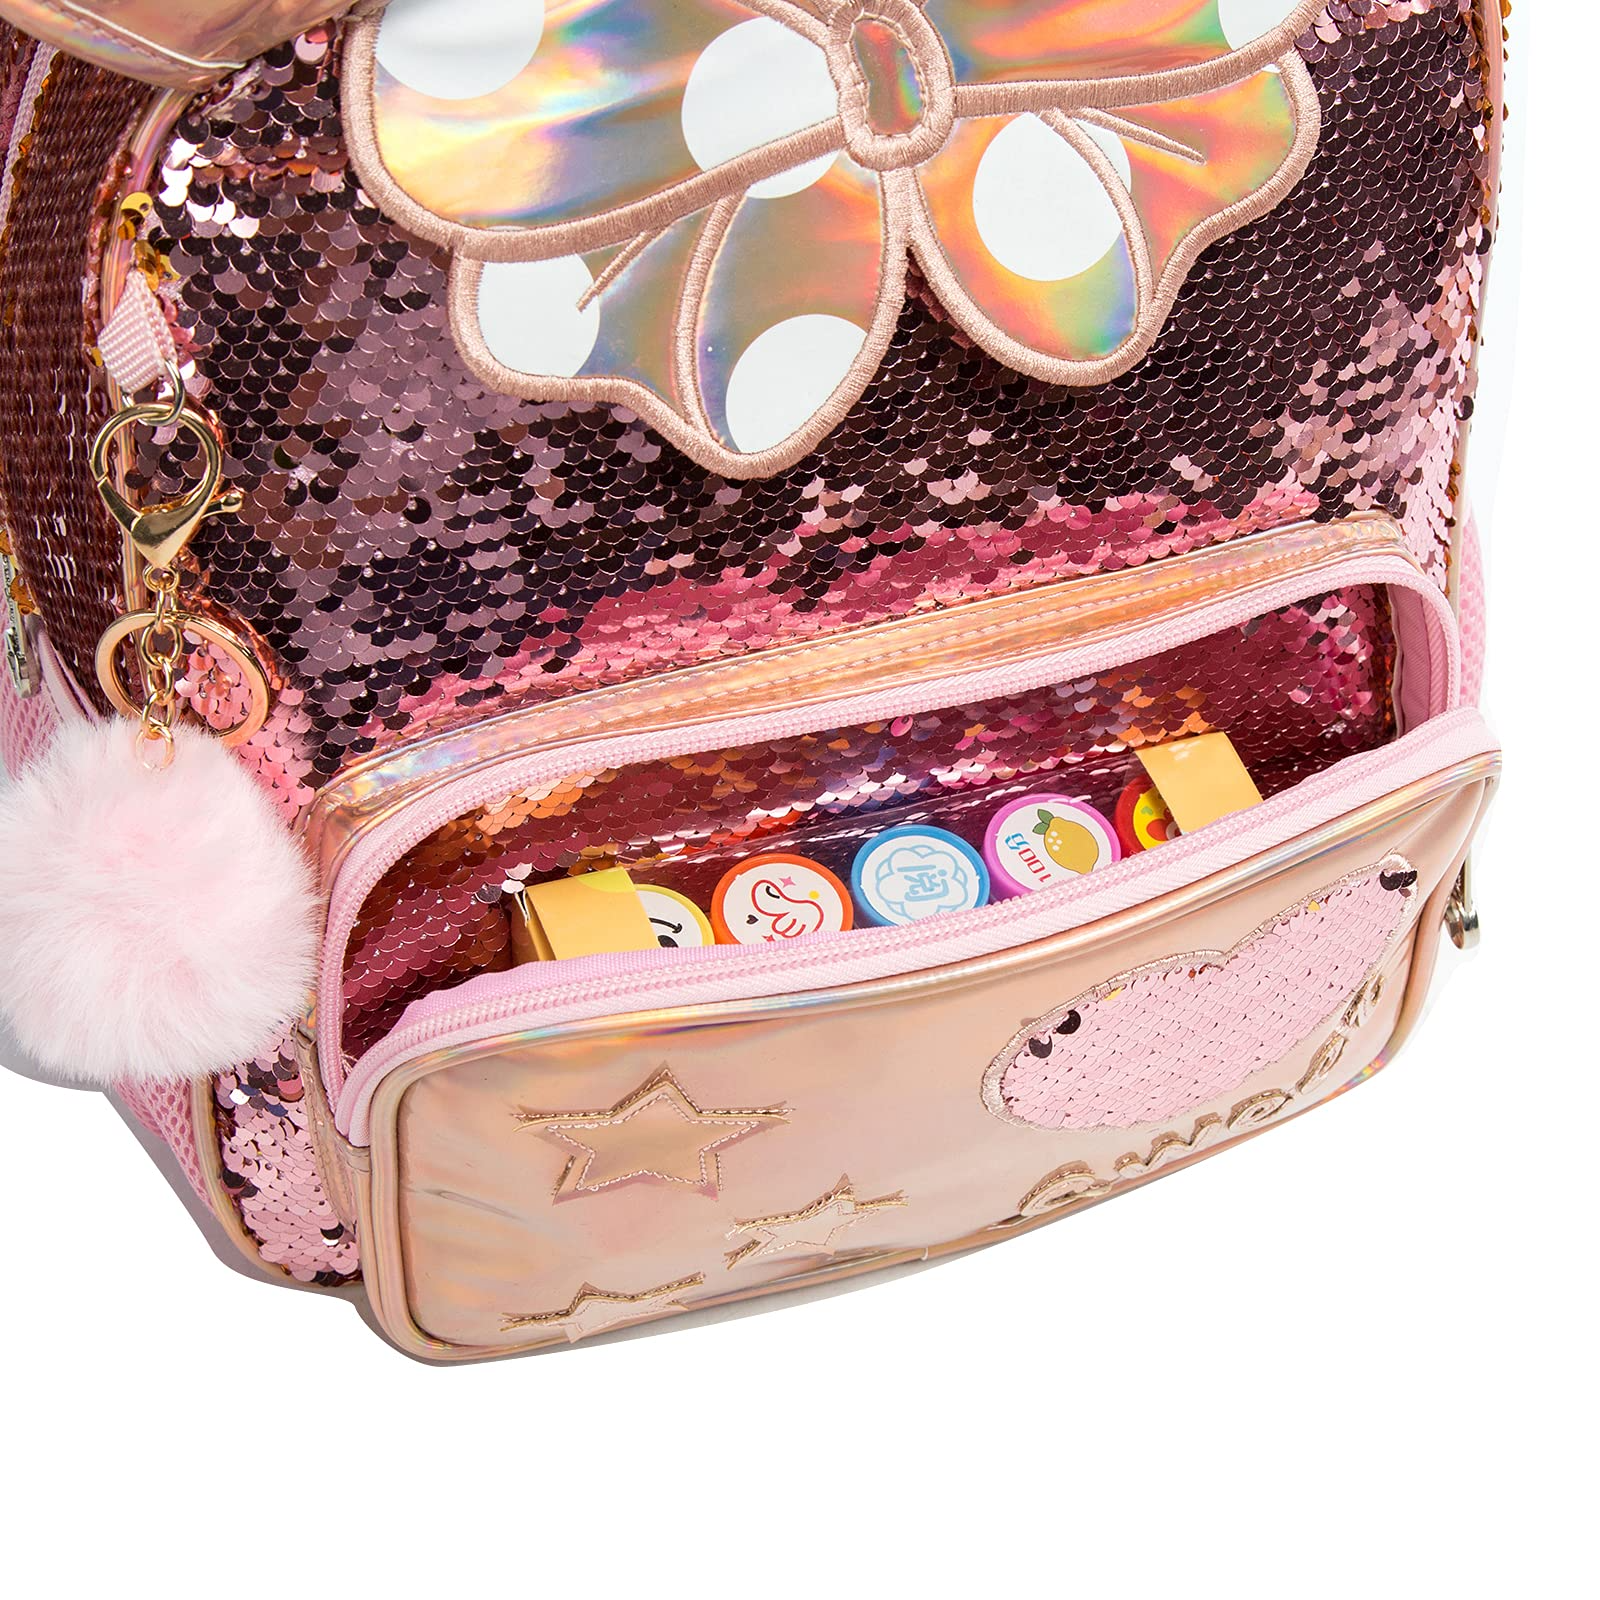 lvyH School Backpack for Kids Girls Students,Glitter Sequin Unicorn Books  Bag Mermaid Backpacks with Pencil Case 